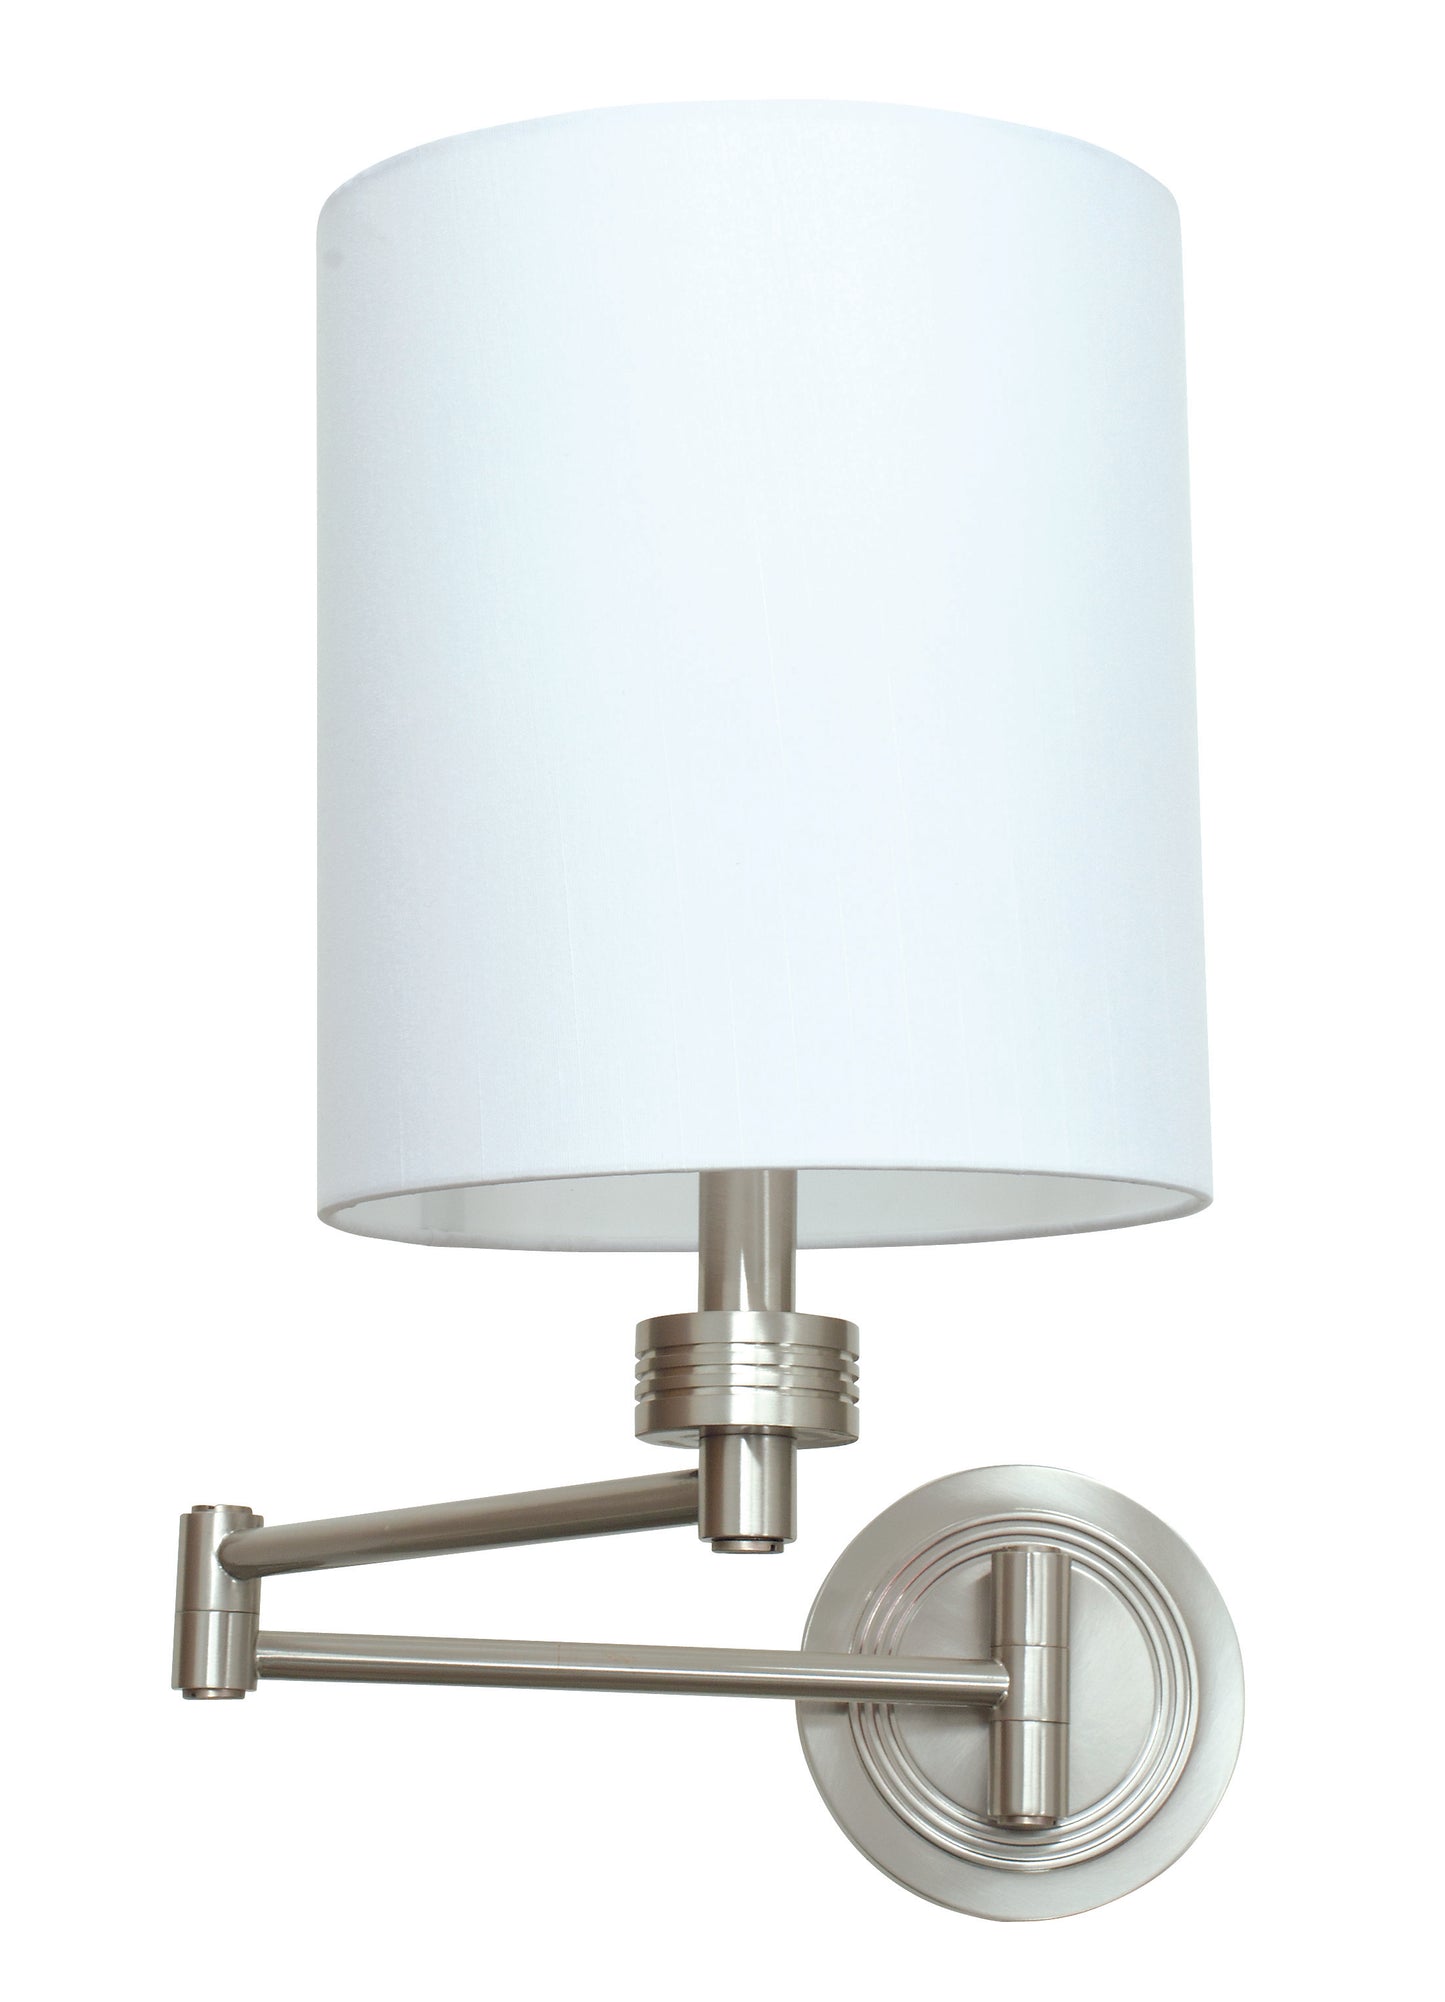 House of Troy Wall Swing Arm Lamp in Satin Nickel WS775-SN